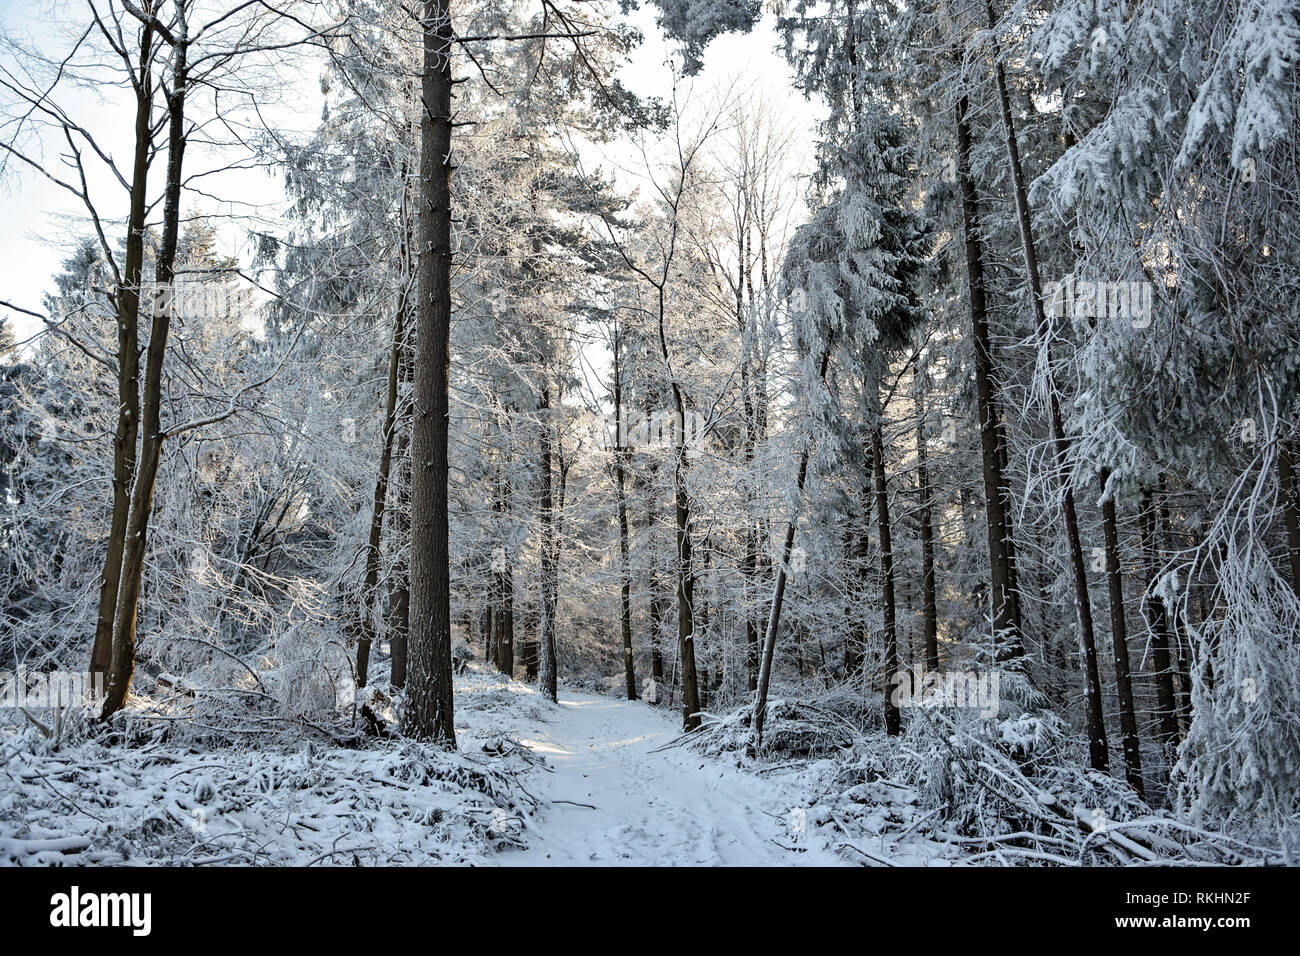 Winter landscape - white and snowy pathway among trees in a deep forest on a sunny day. Stock Photo